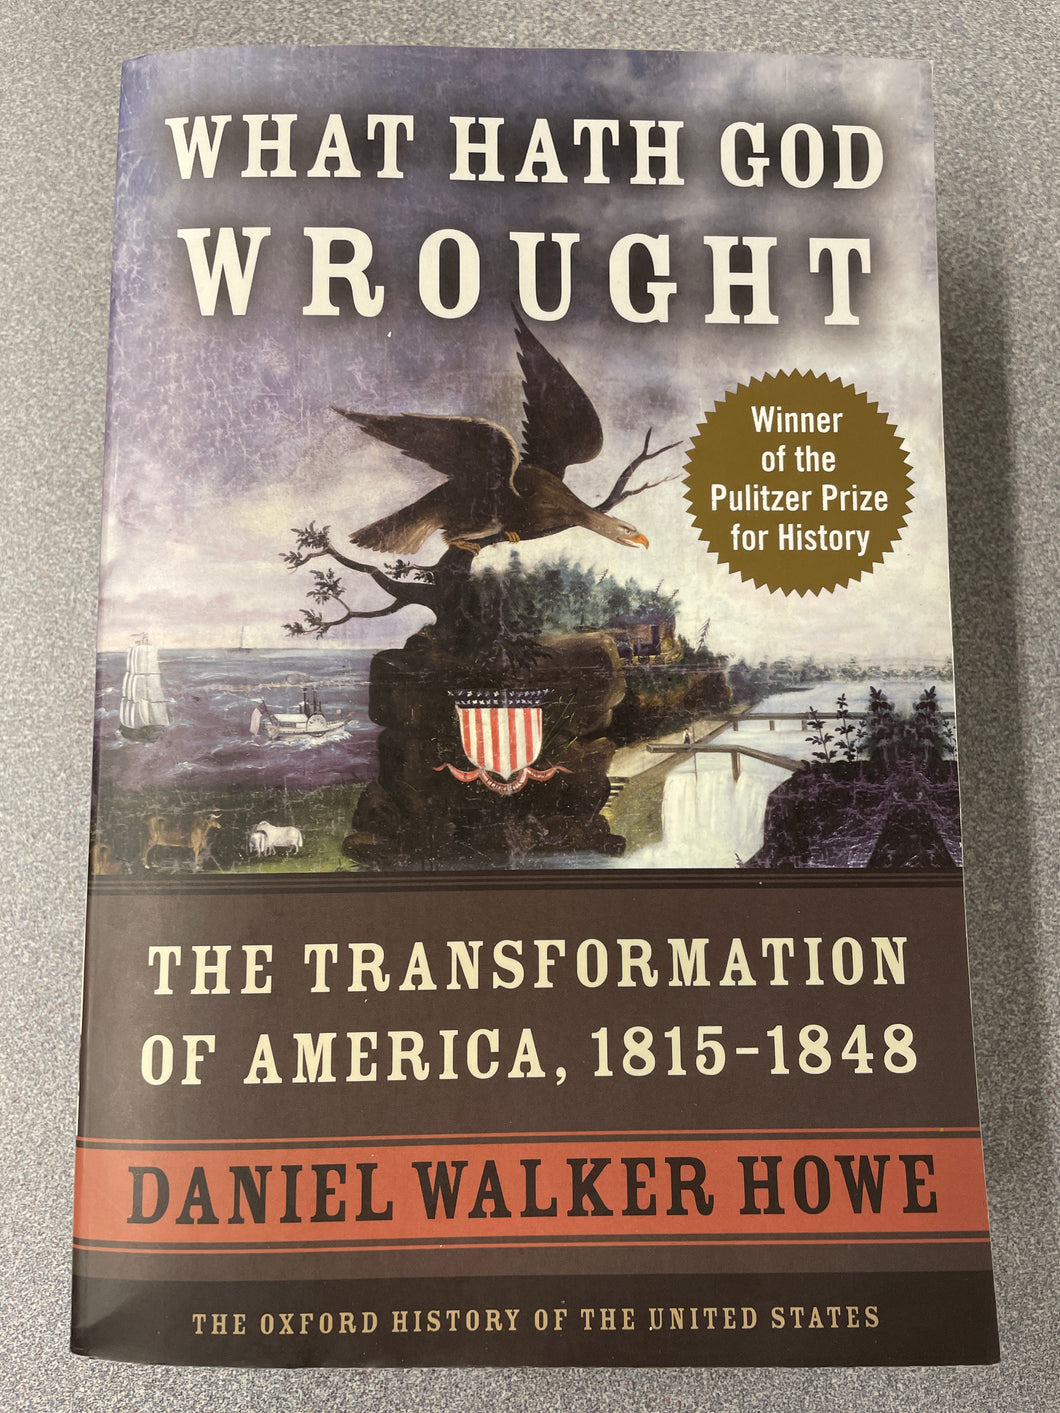 What Hath God Wrought: The Transformation of America, 1815-1848,  Howe, Daniel Walker [2009] H 11/23